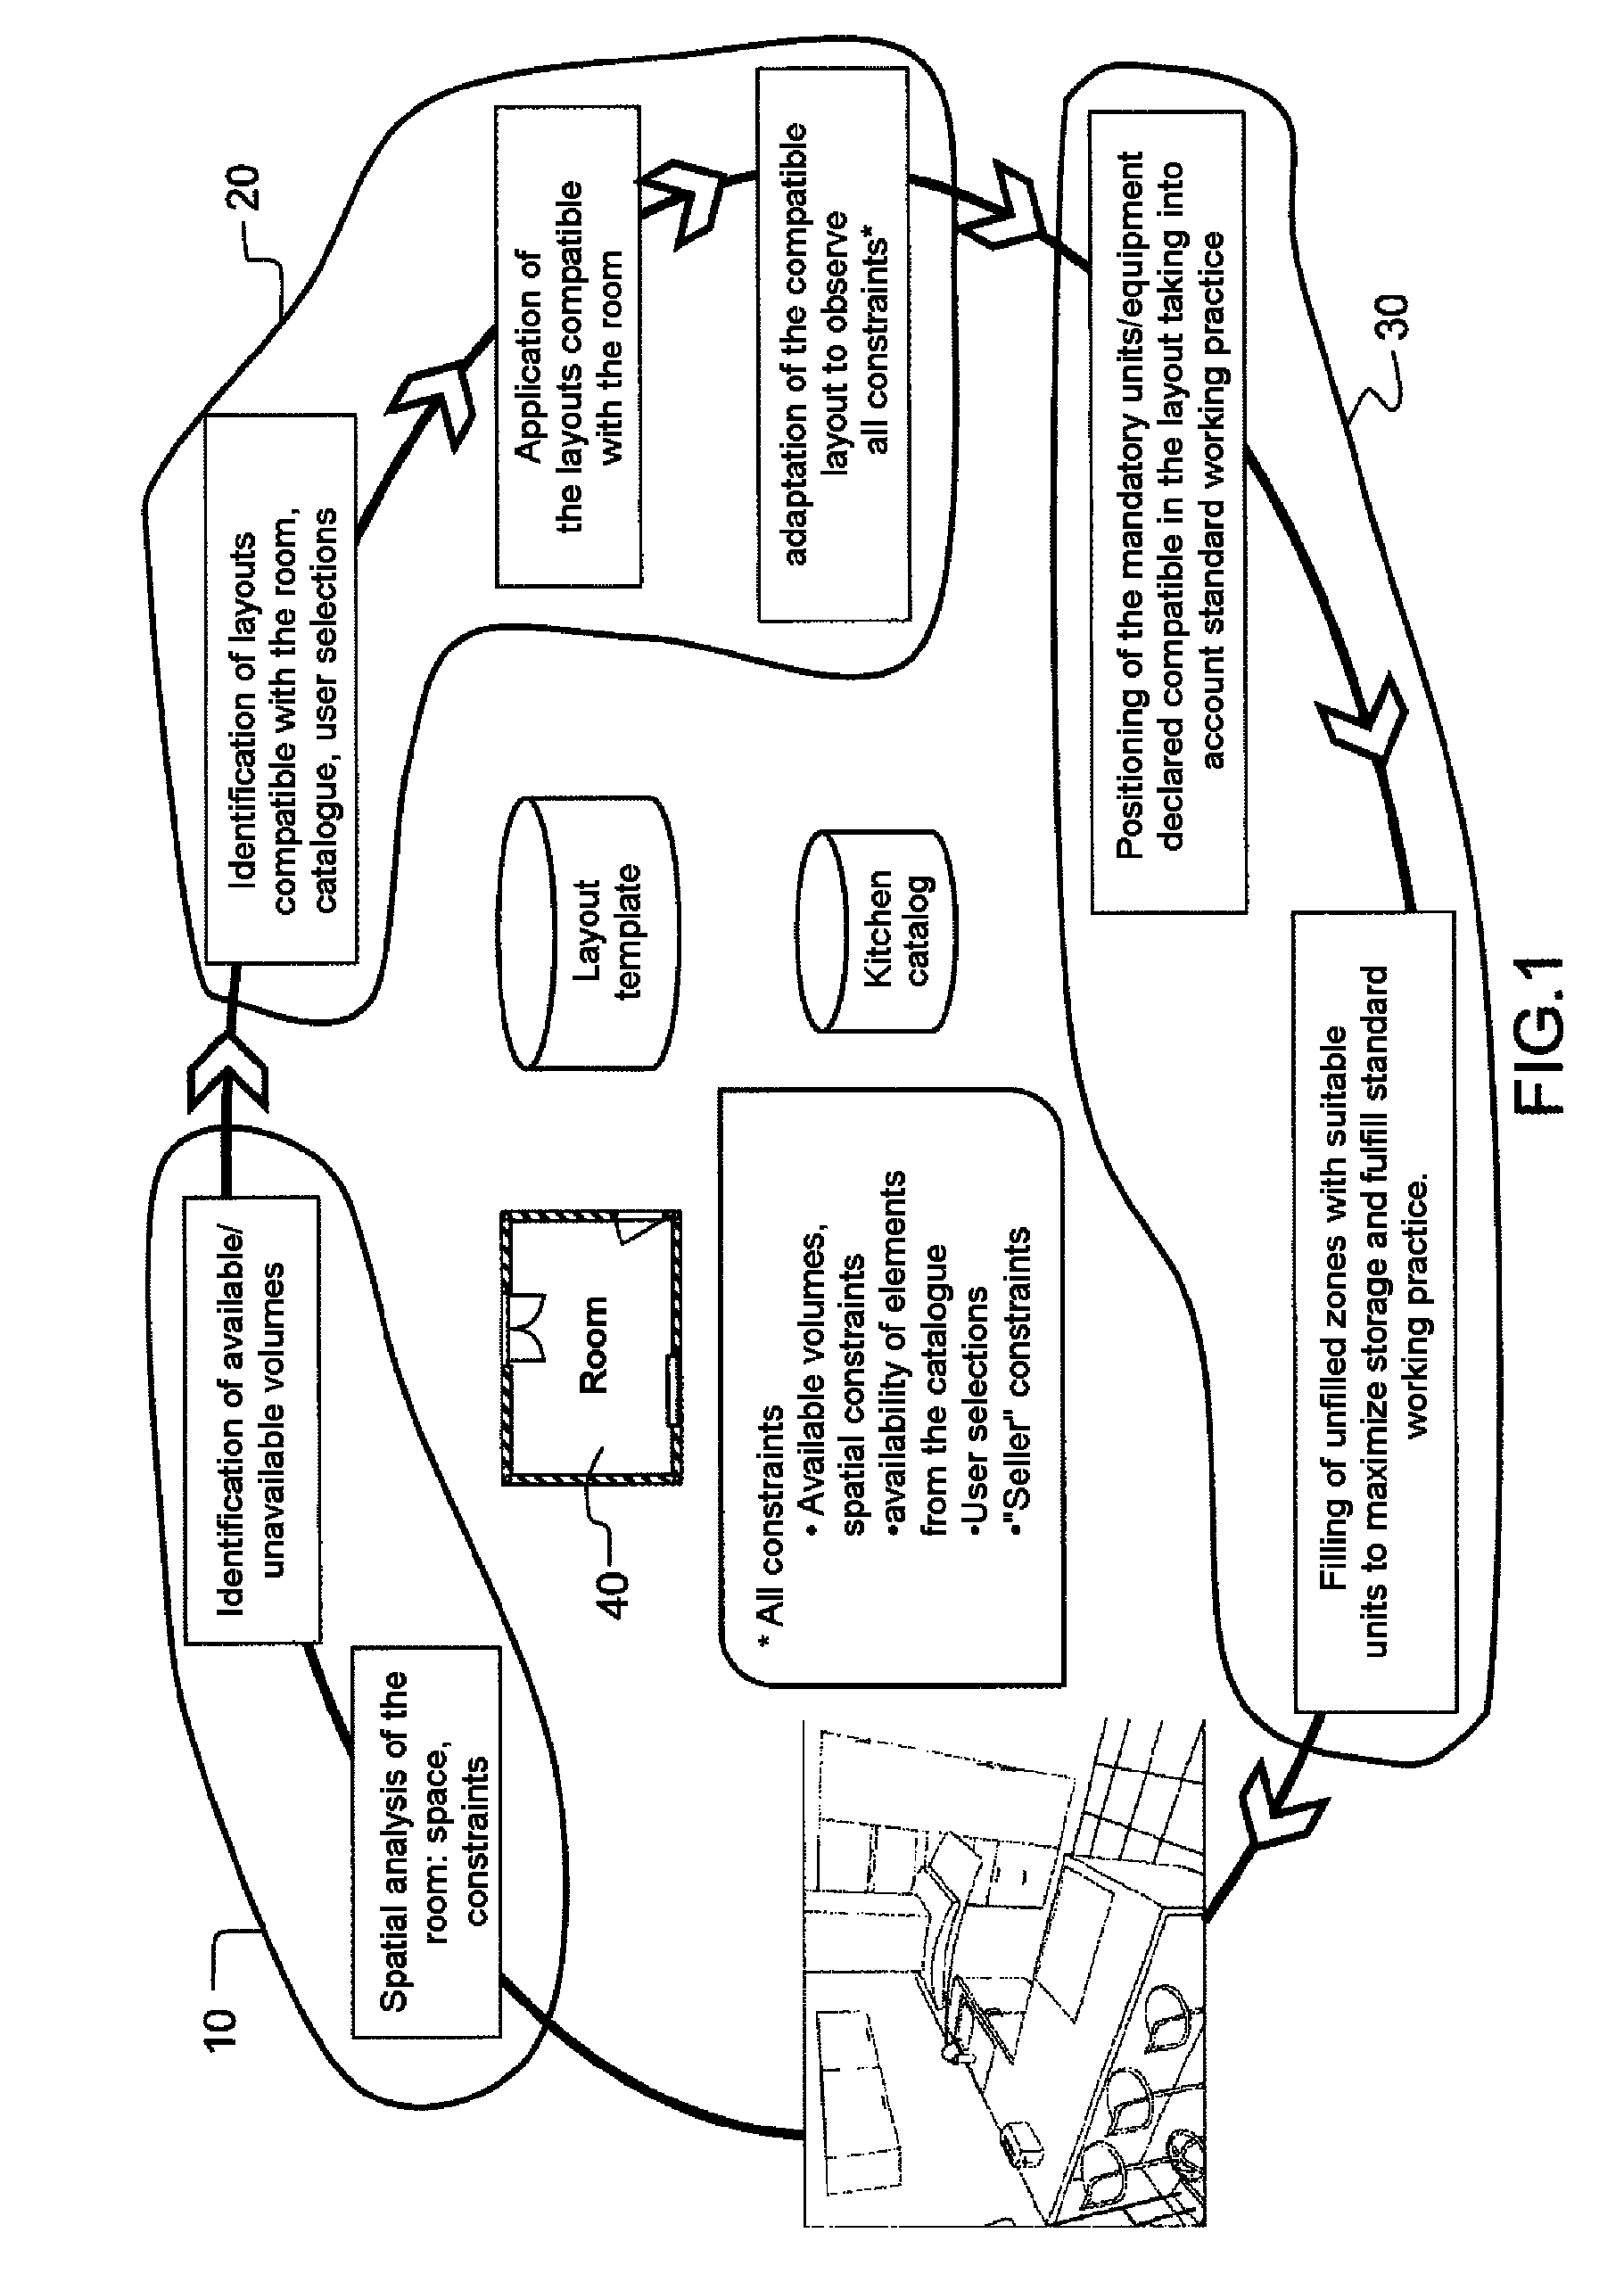 Computer aided design method and system for modular layouts